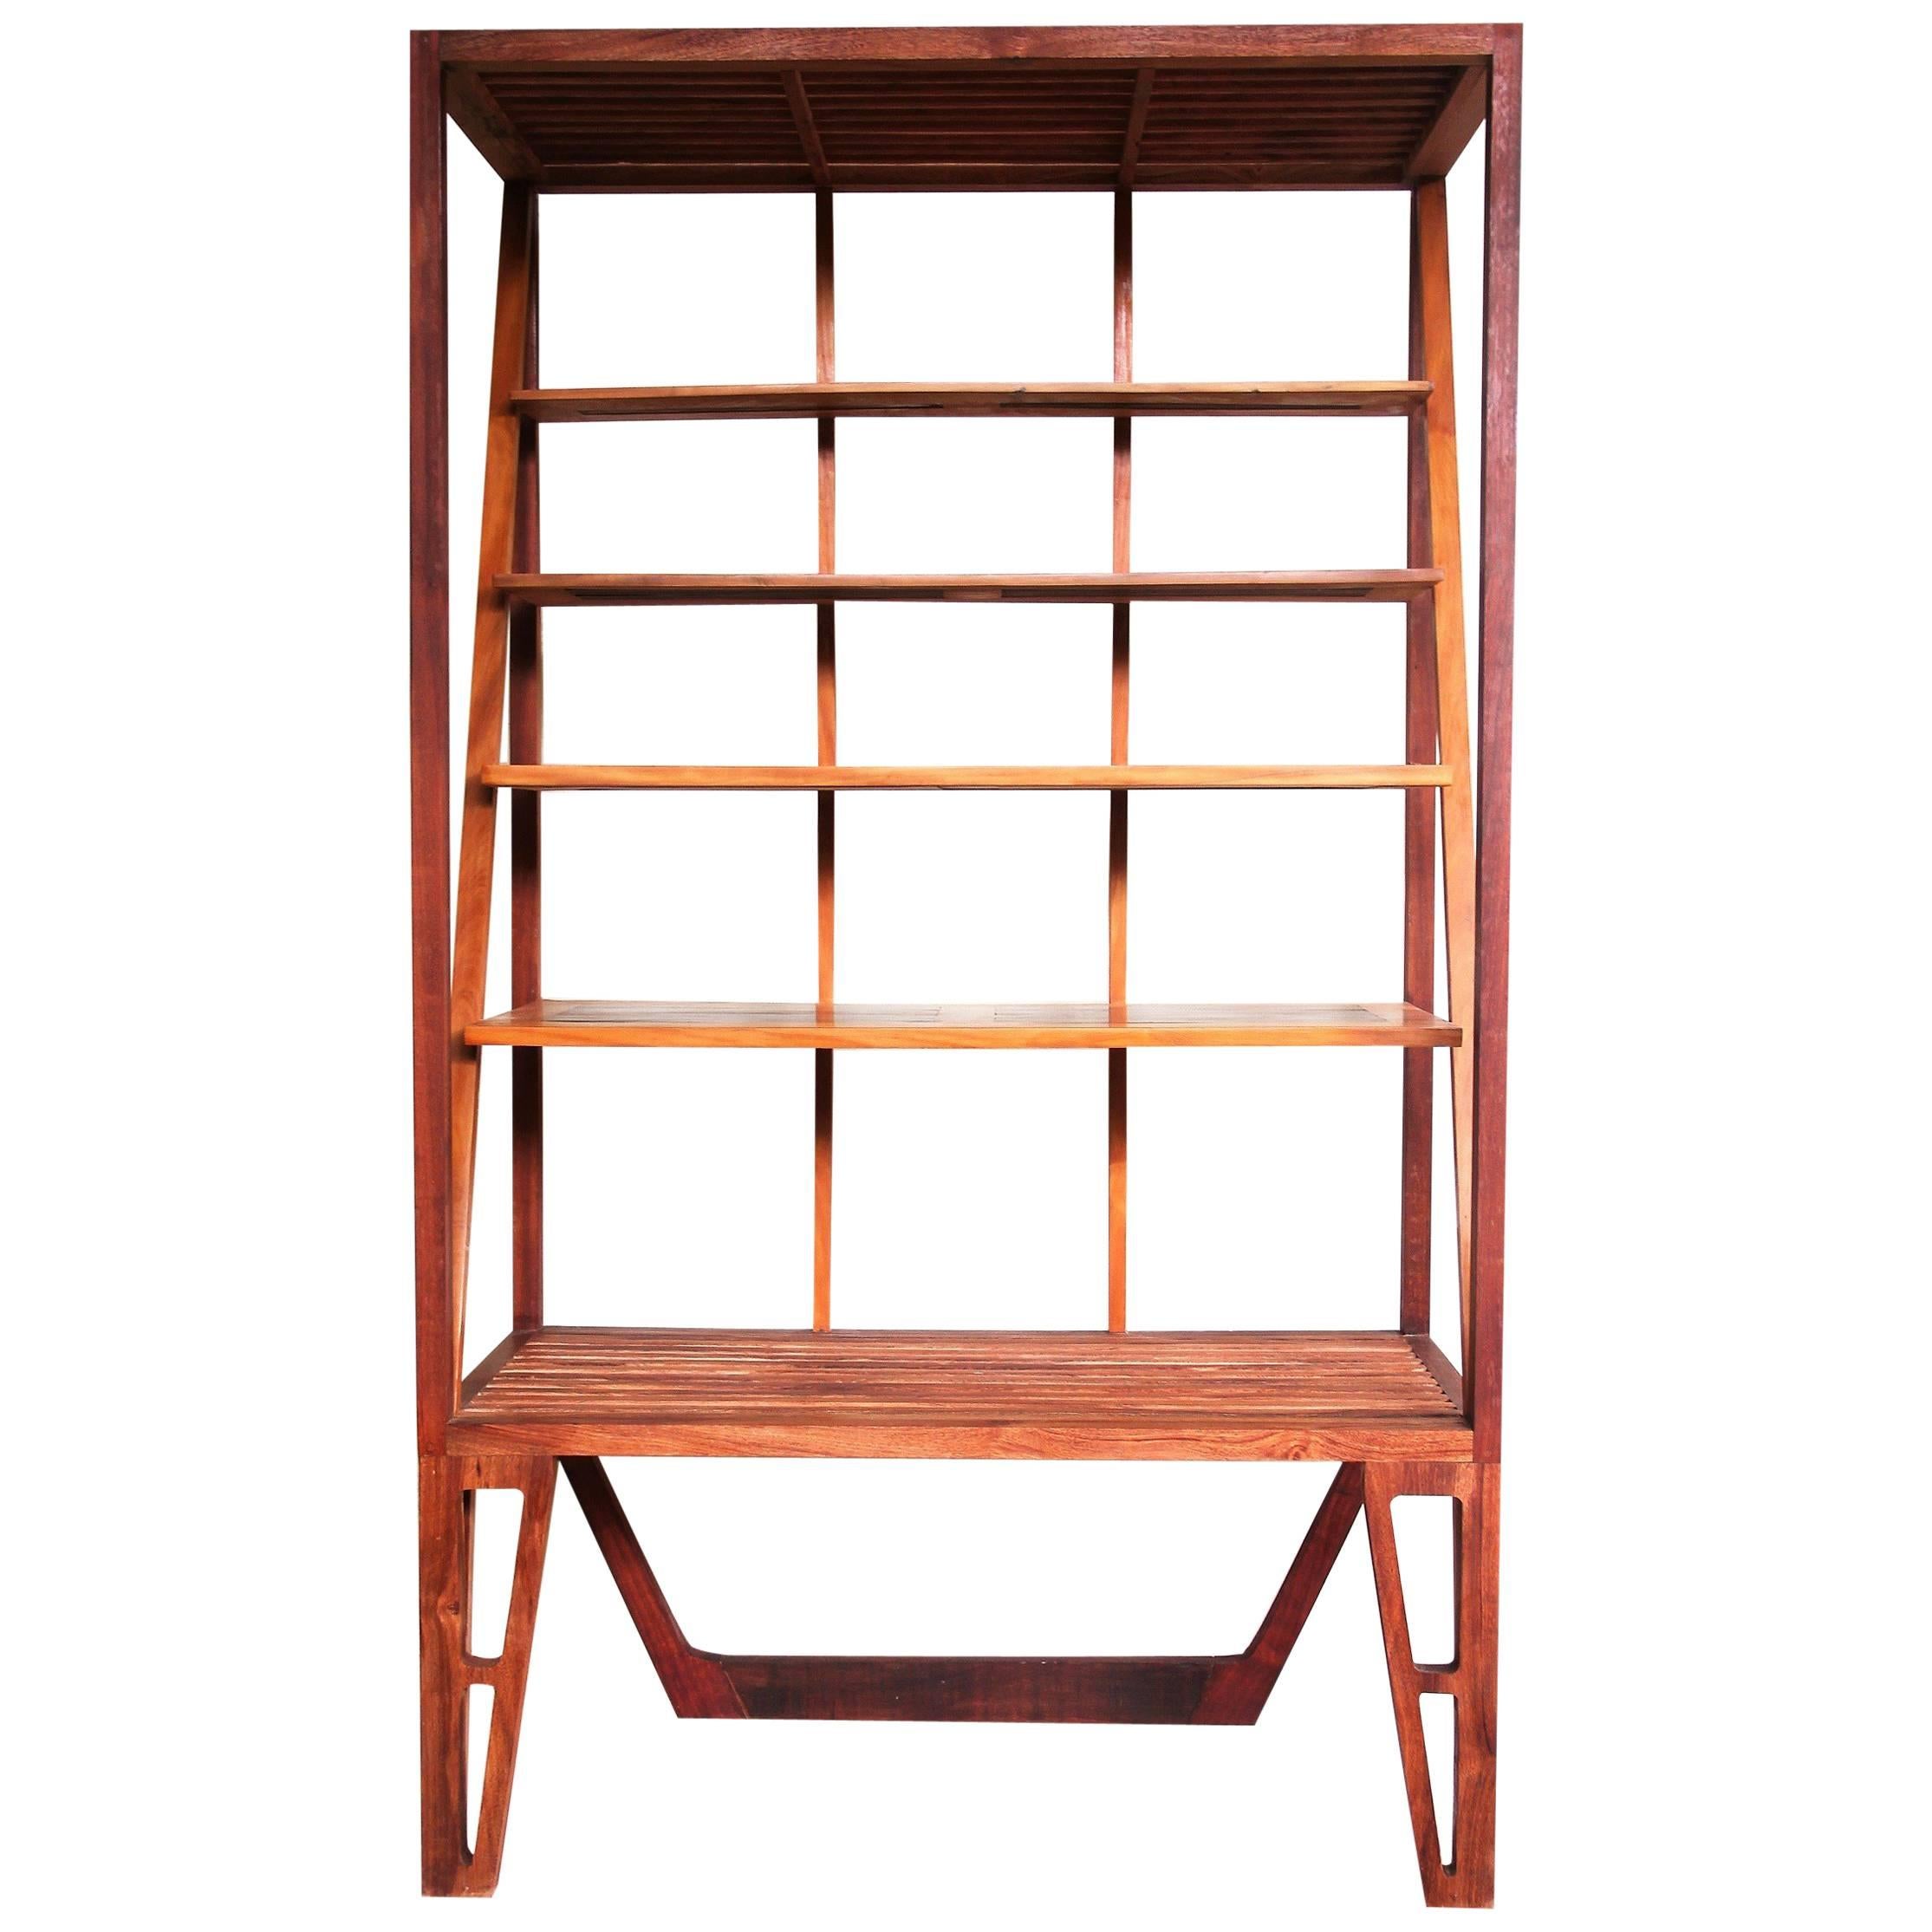 This modern bookcase, made of Brazilian hardwood, is named 